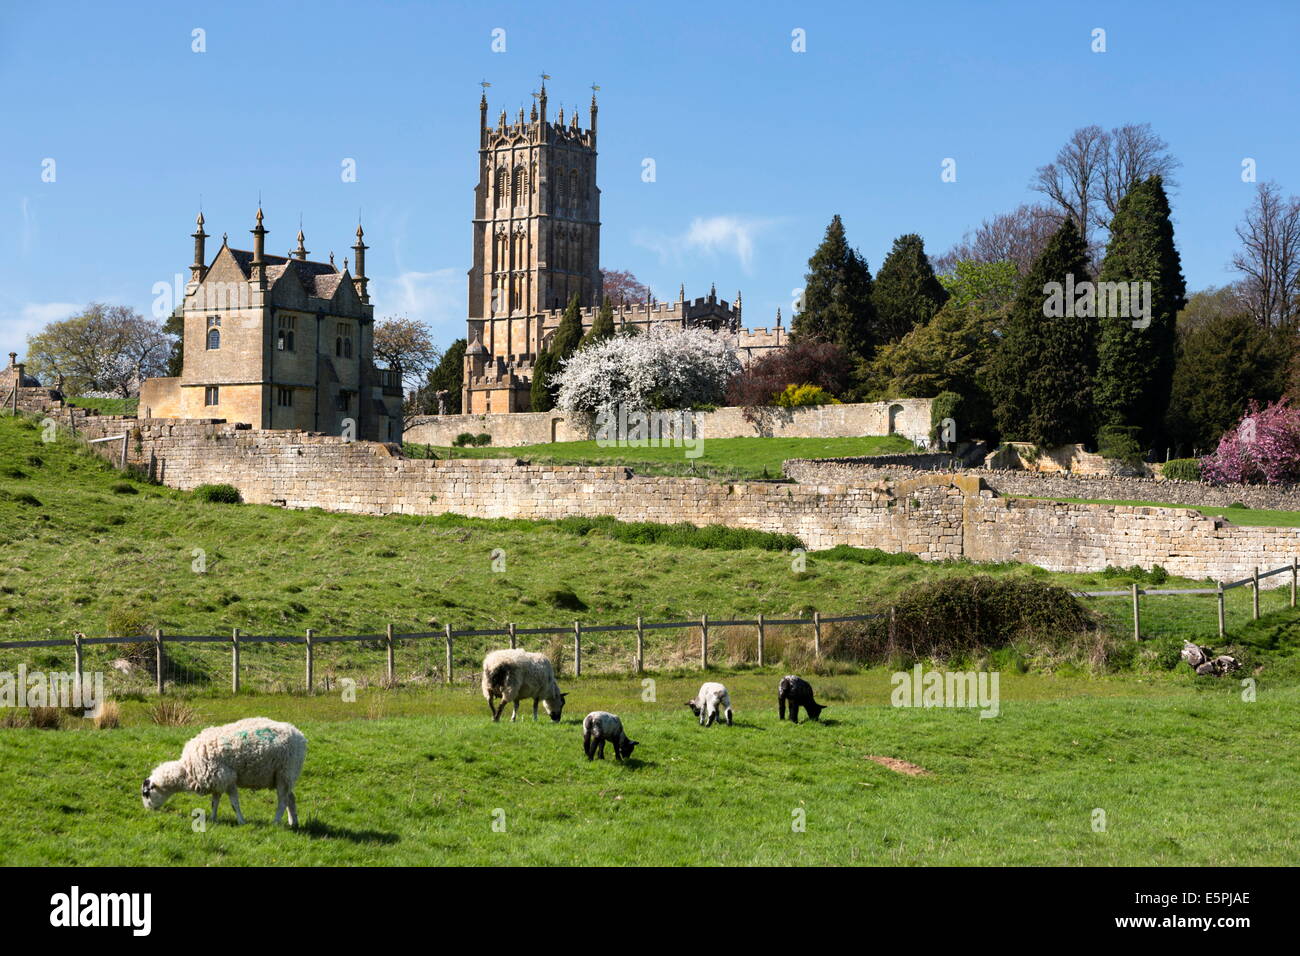 St James Church, Chipping Campden, Cotswolds, Gloucestershire, England, United Kingdom, Europe Stock Photo